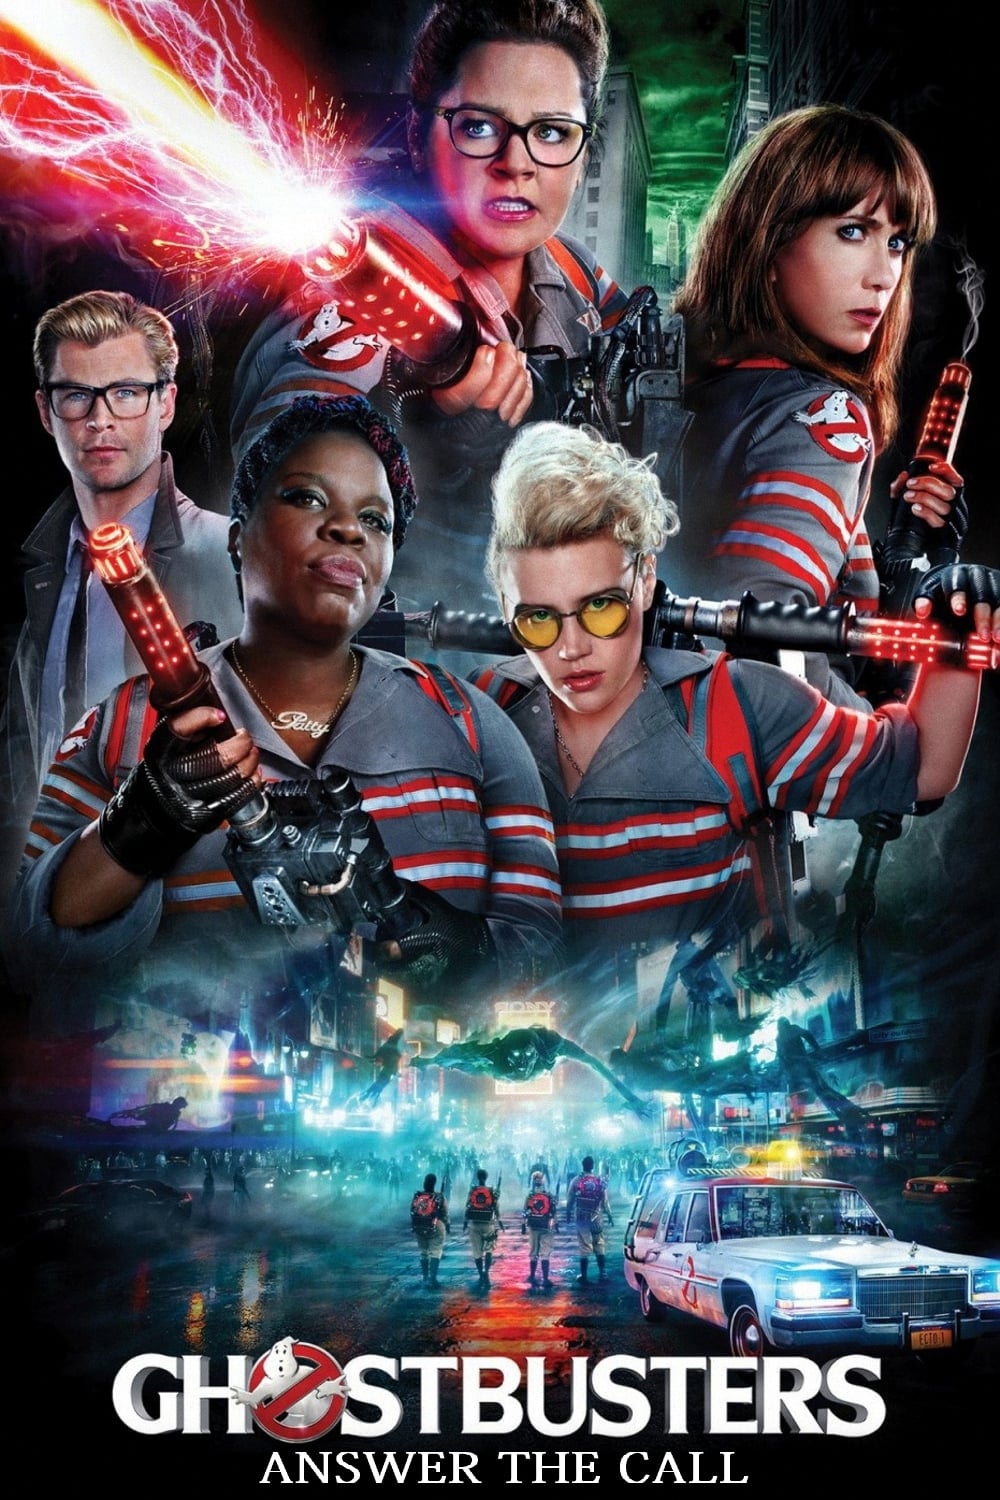 ghostbusters pics movie